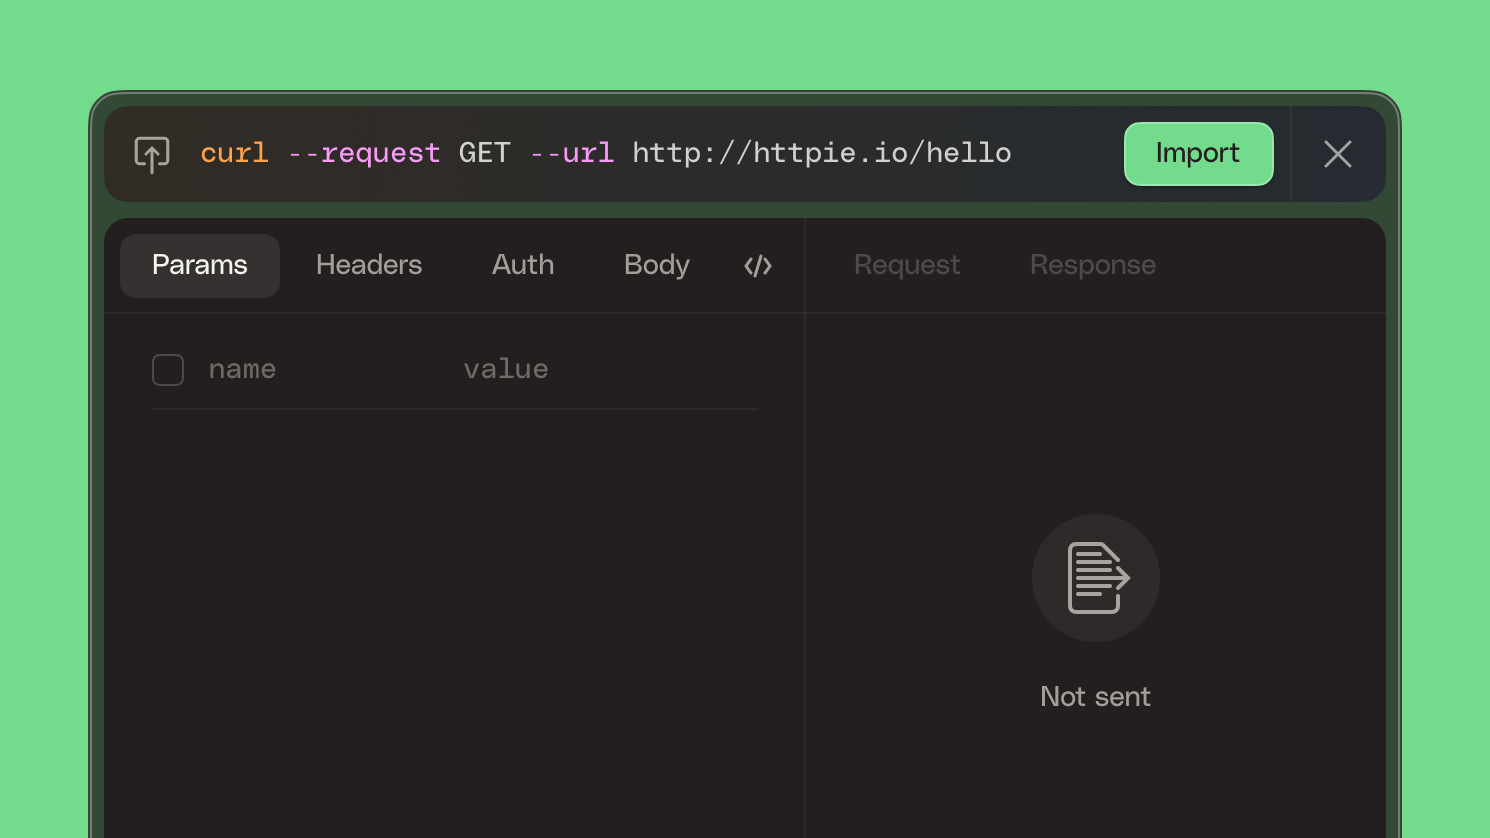 cURL command in the URL field